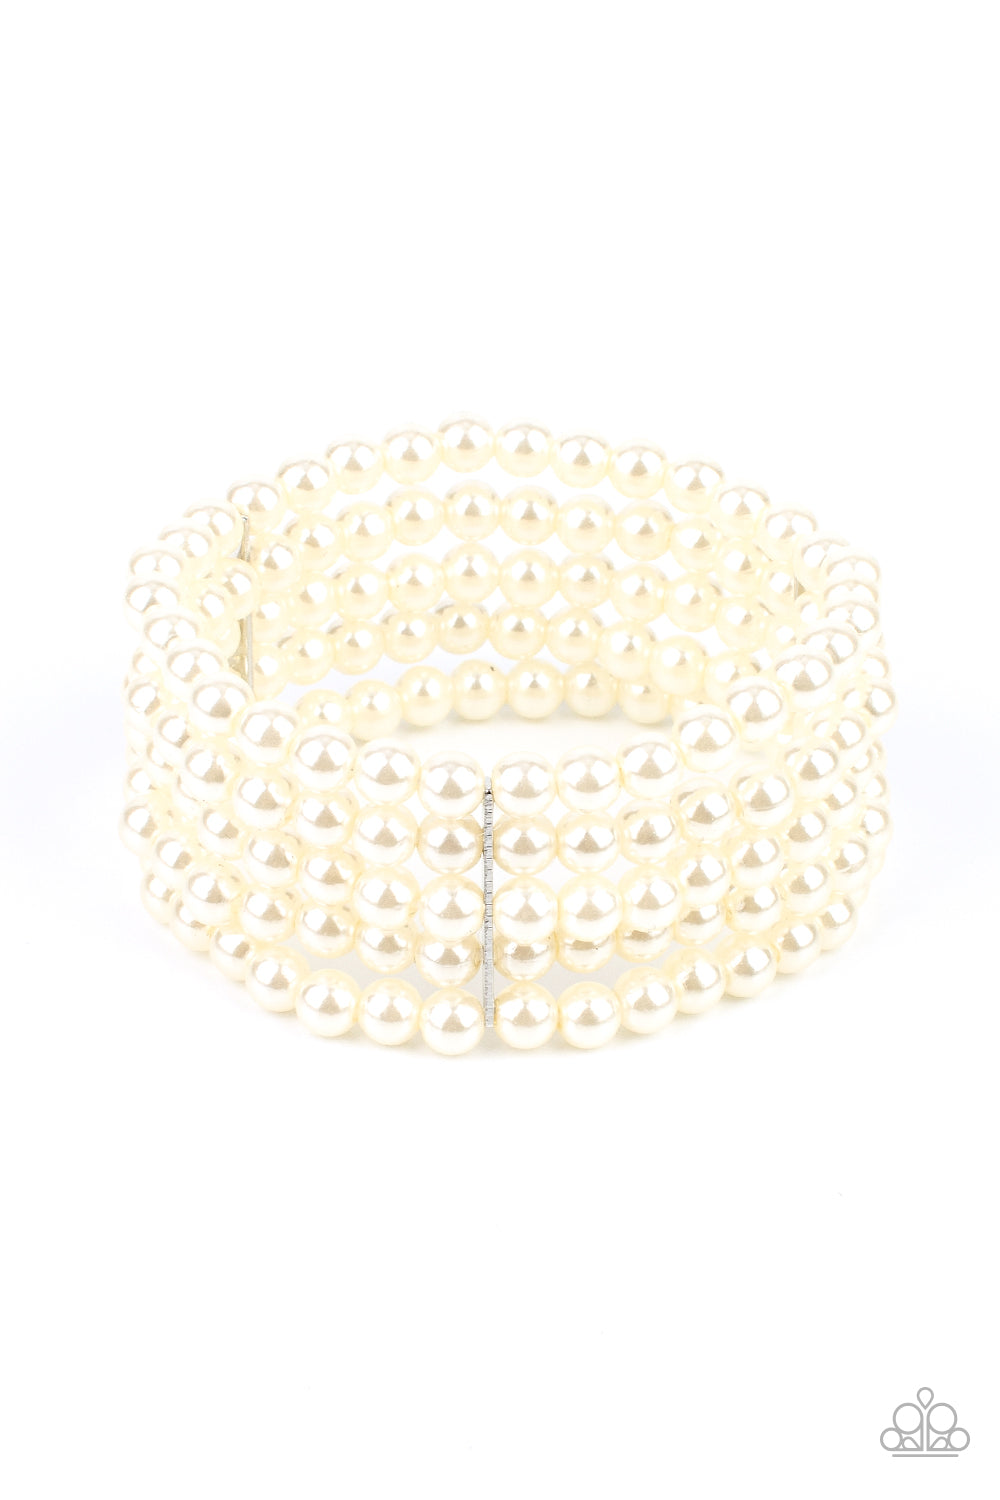 Stacked layers of luminous white pearl-like beads are threaded along stretchy bands creating a subtly indulgent allure around the wrist.